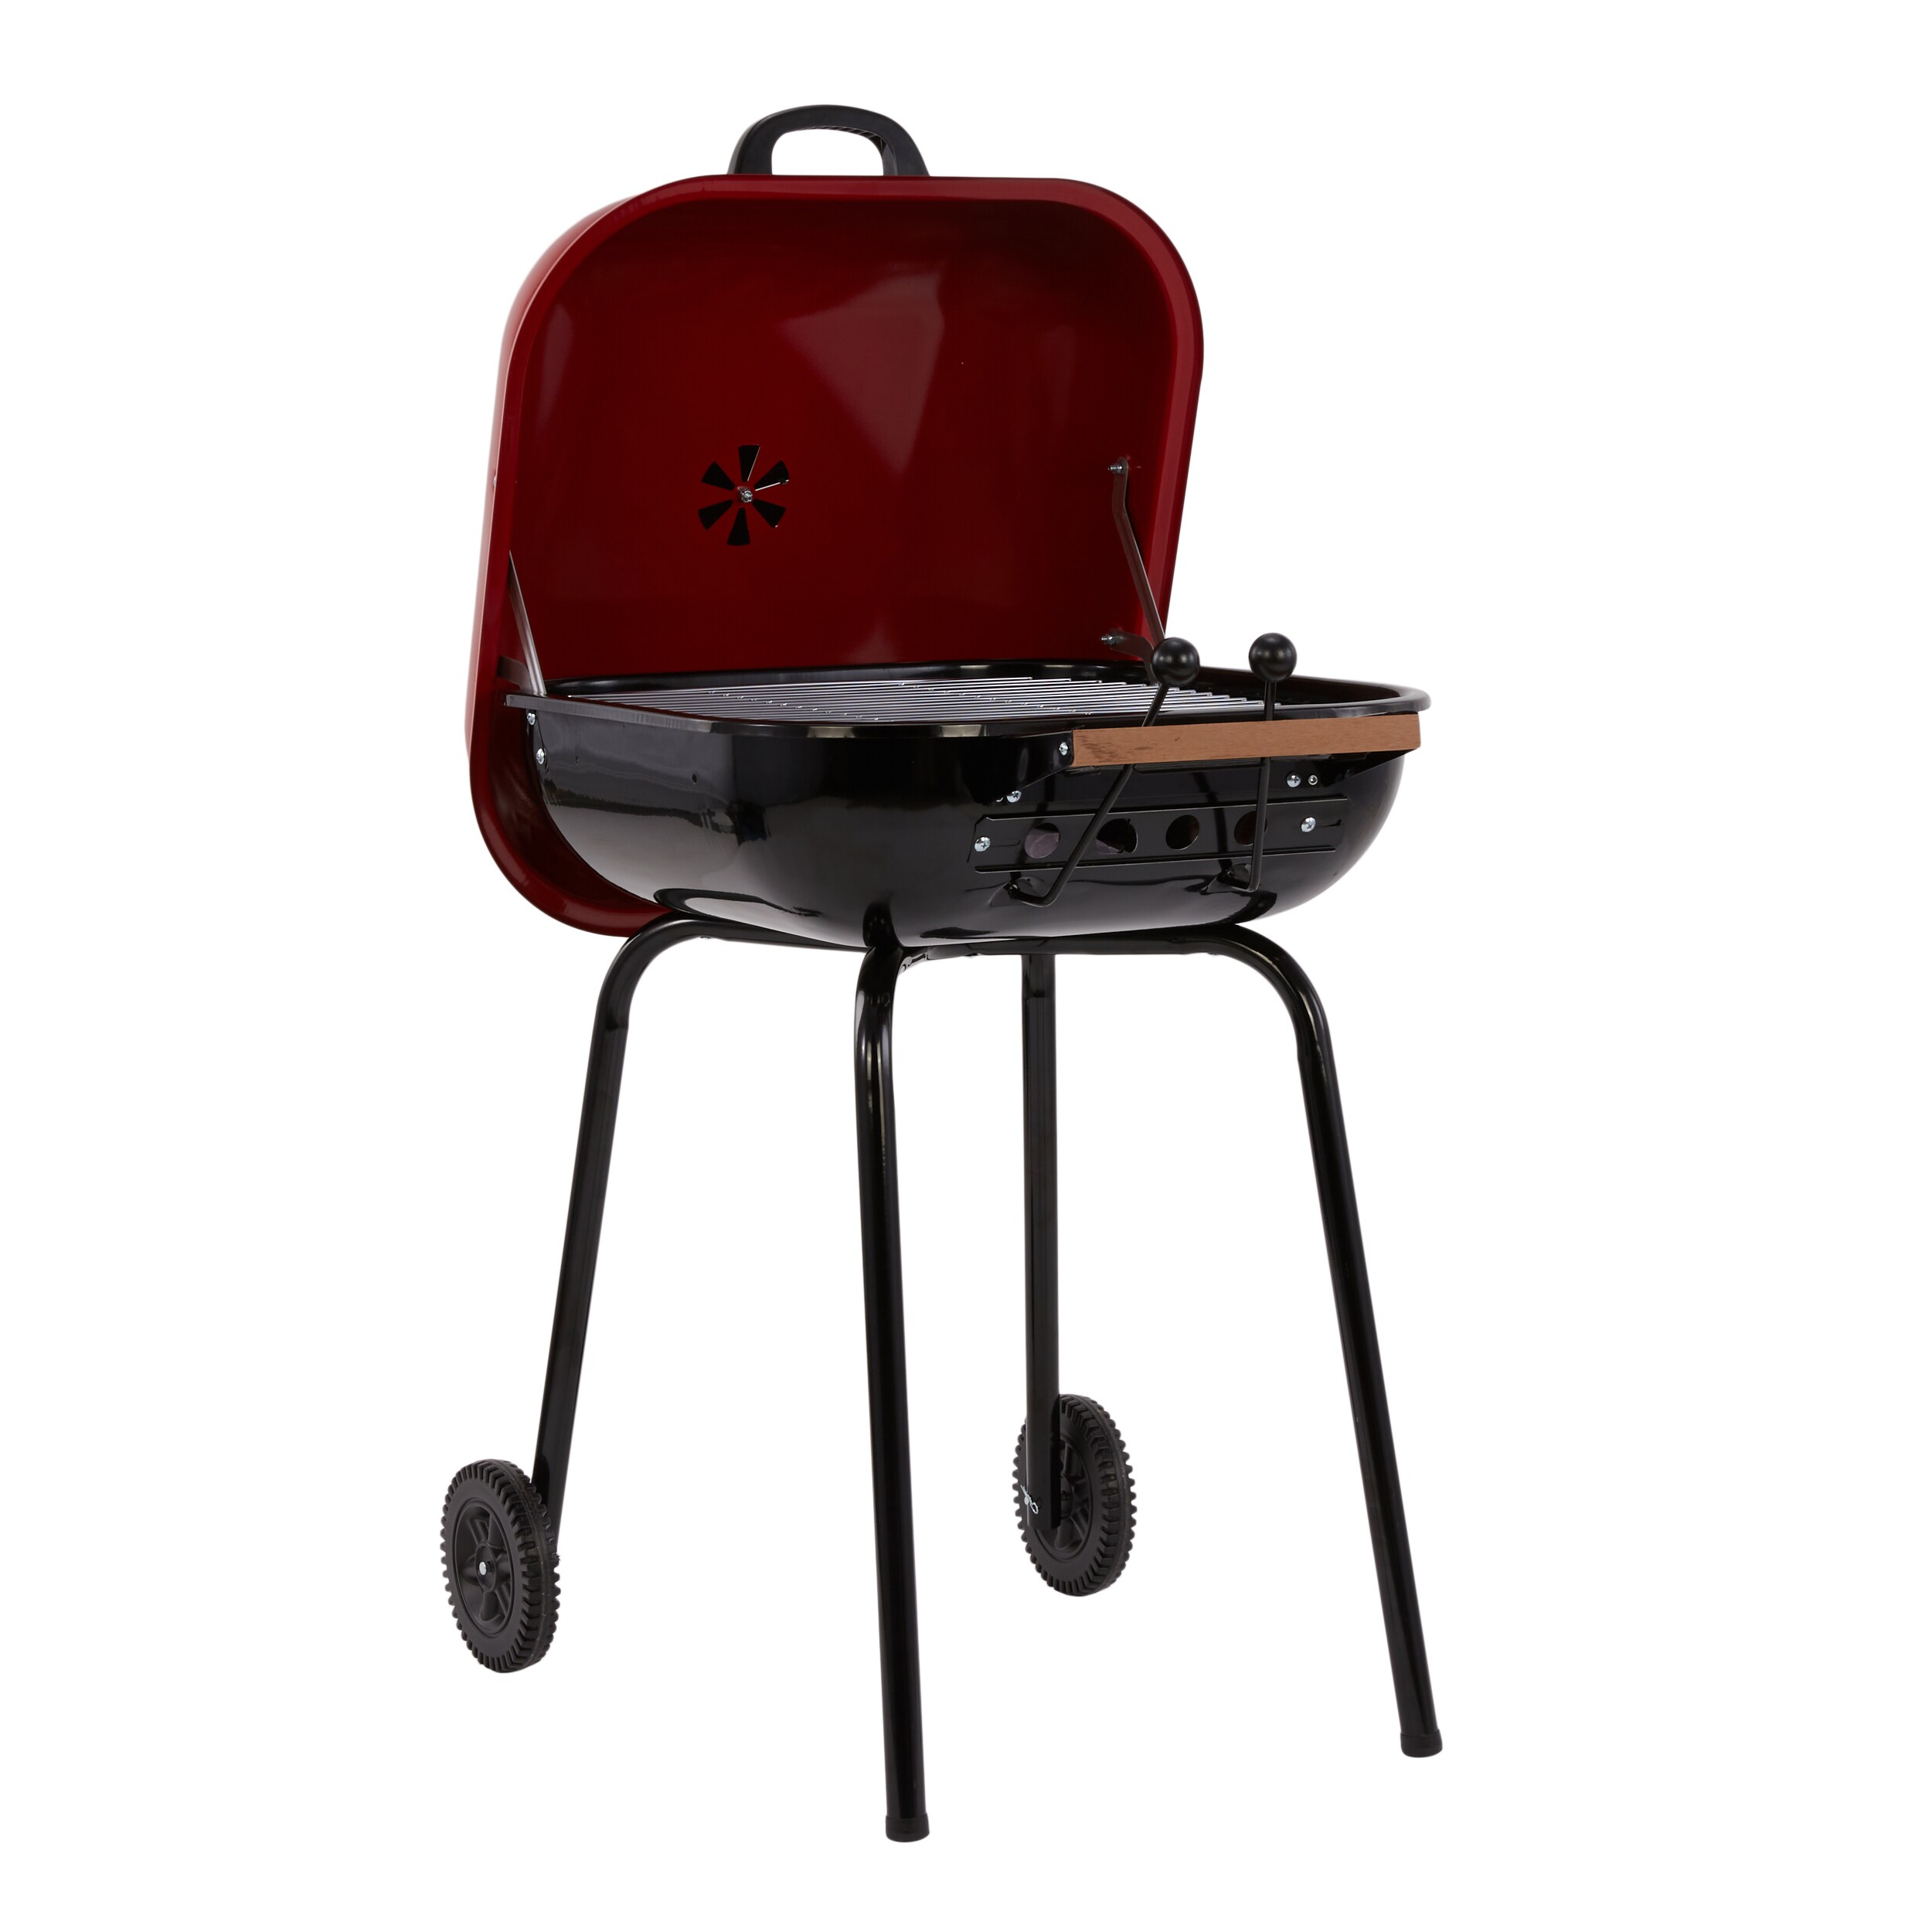 Americana 21.25-in W Red Charcoal Grill